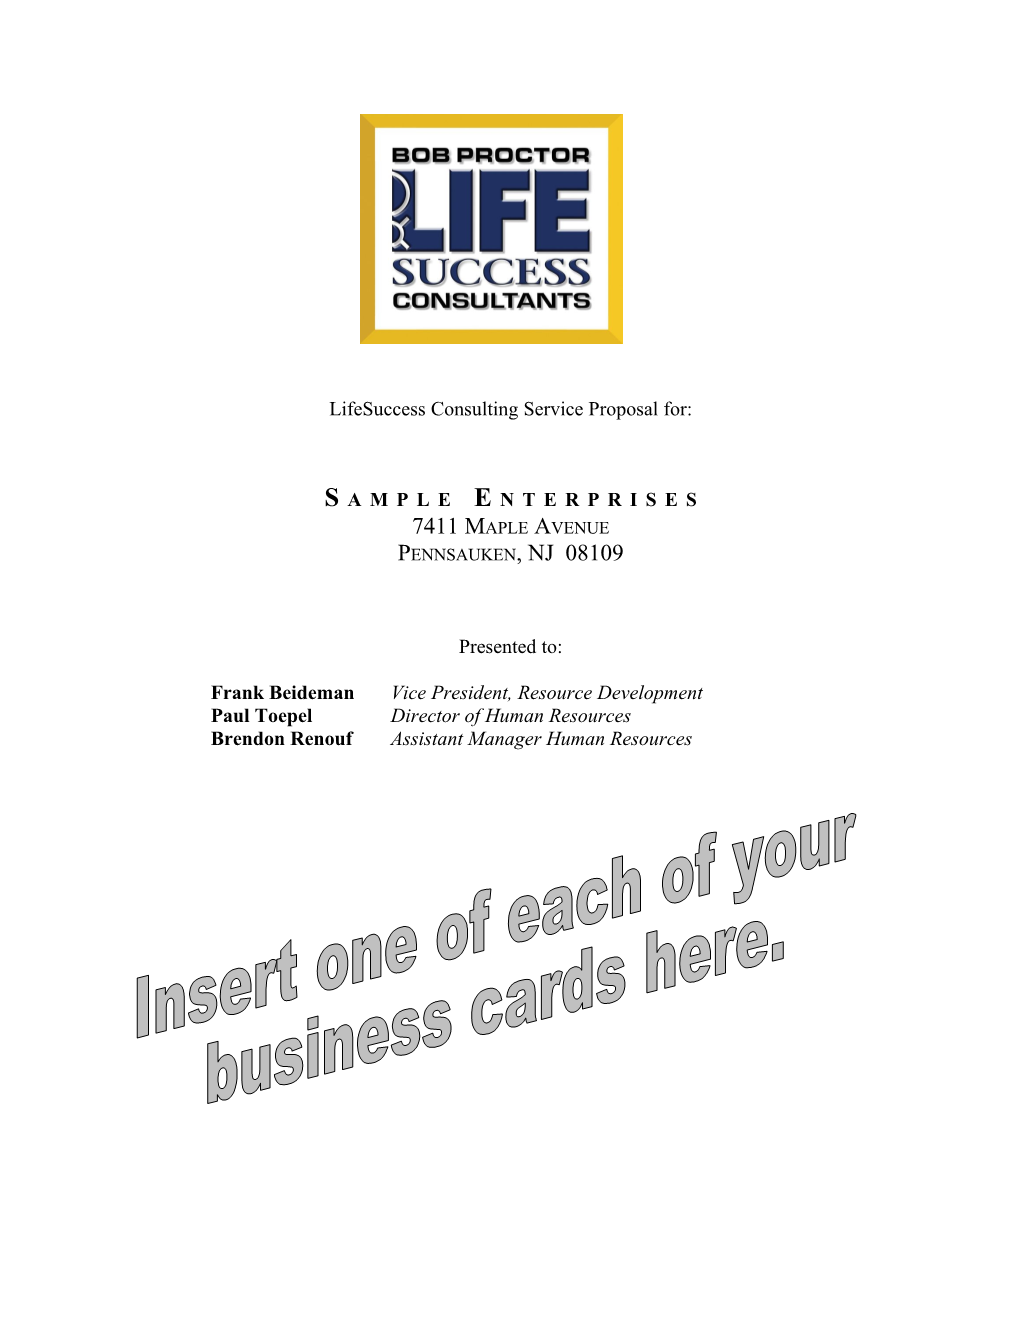 Lifesuccess Consulting Service Proposal For